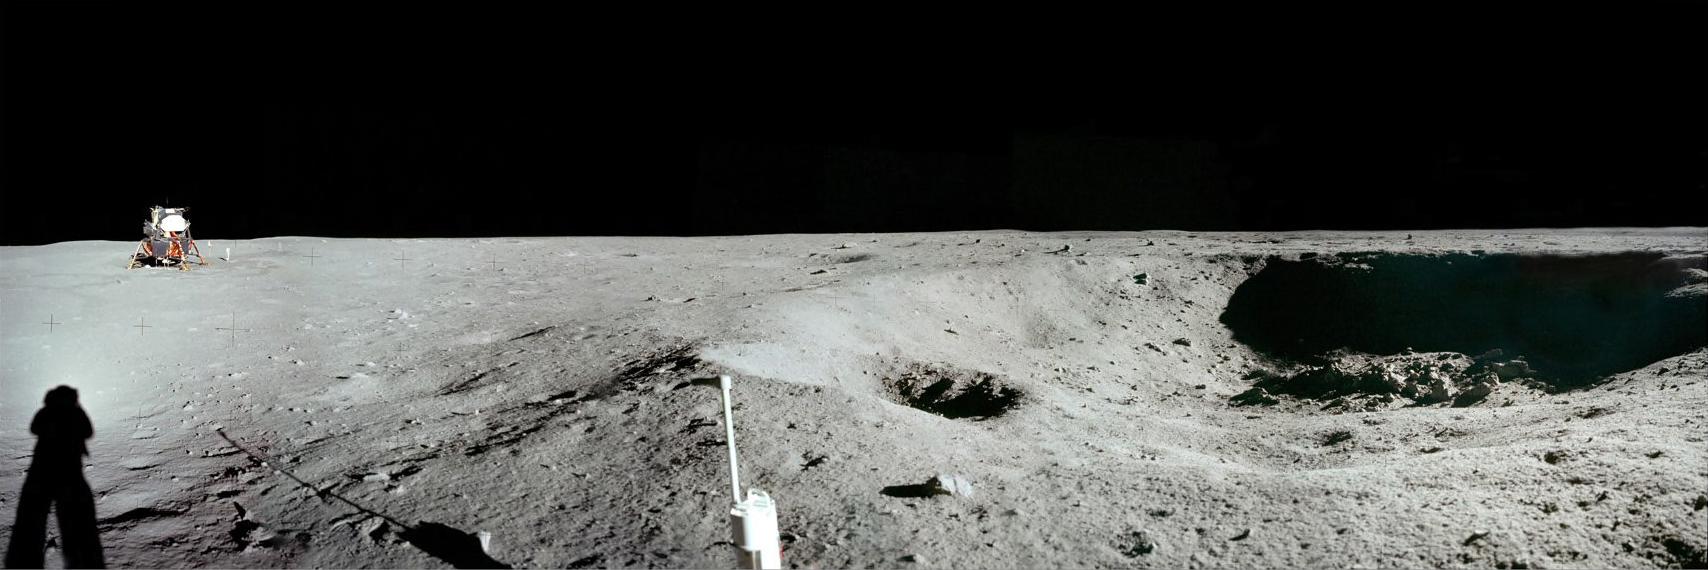 Meet the 5 Teams Racing to Explore the Moon « American View